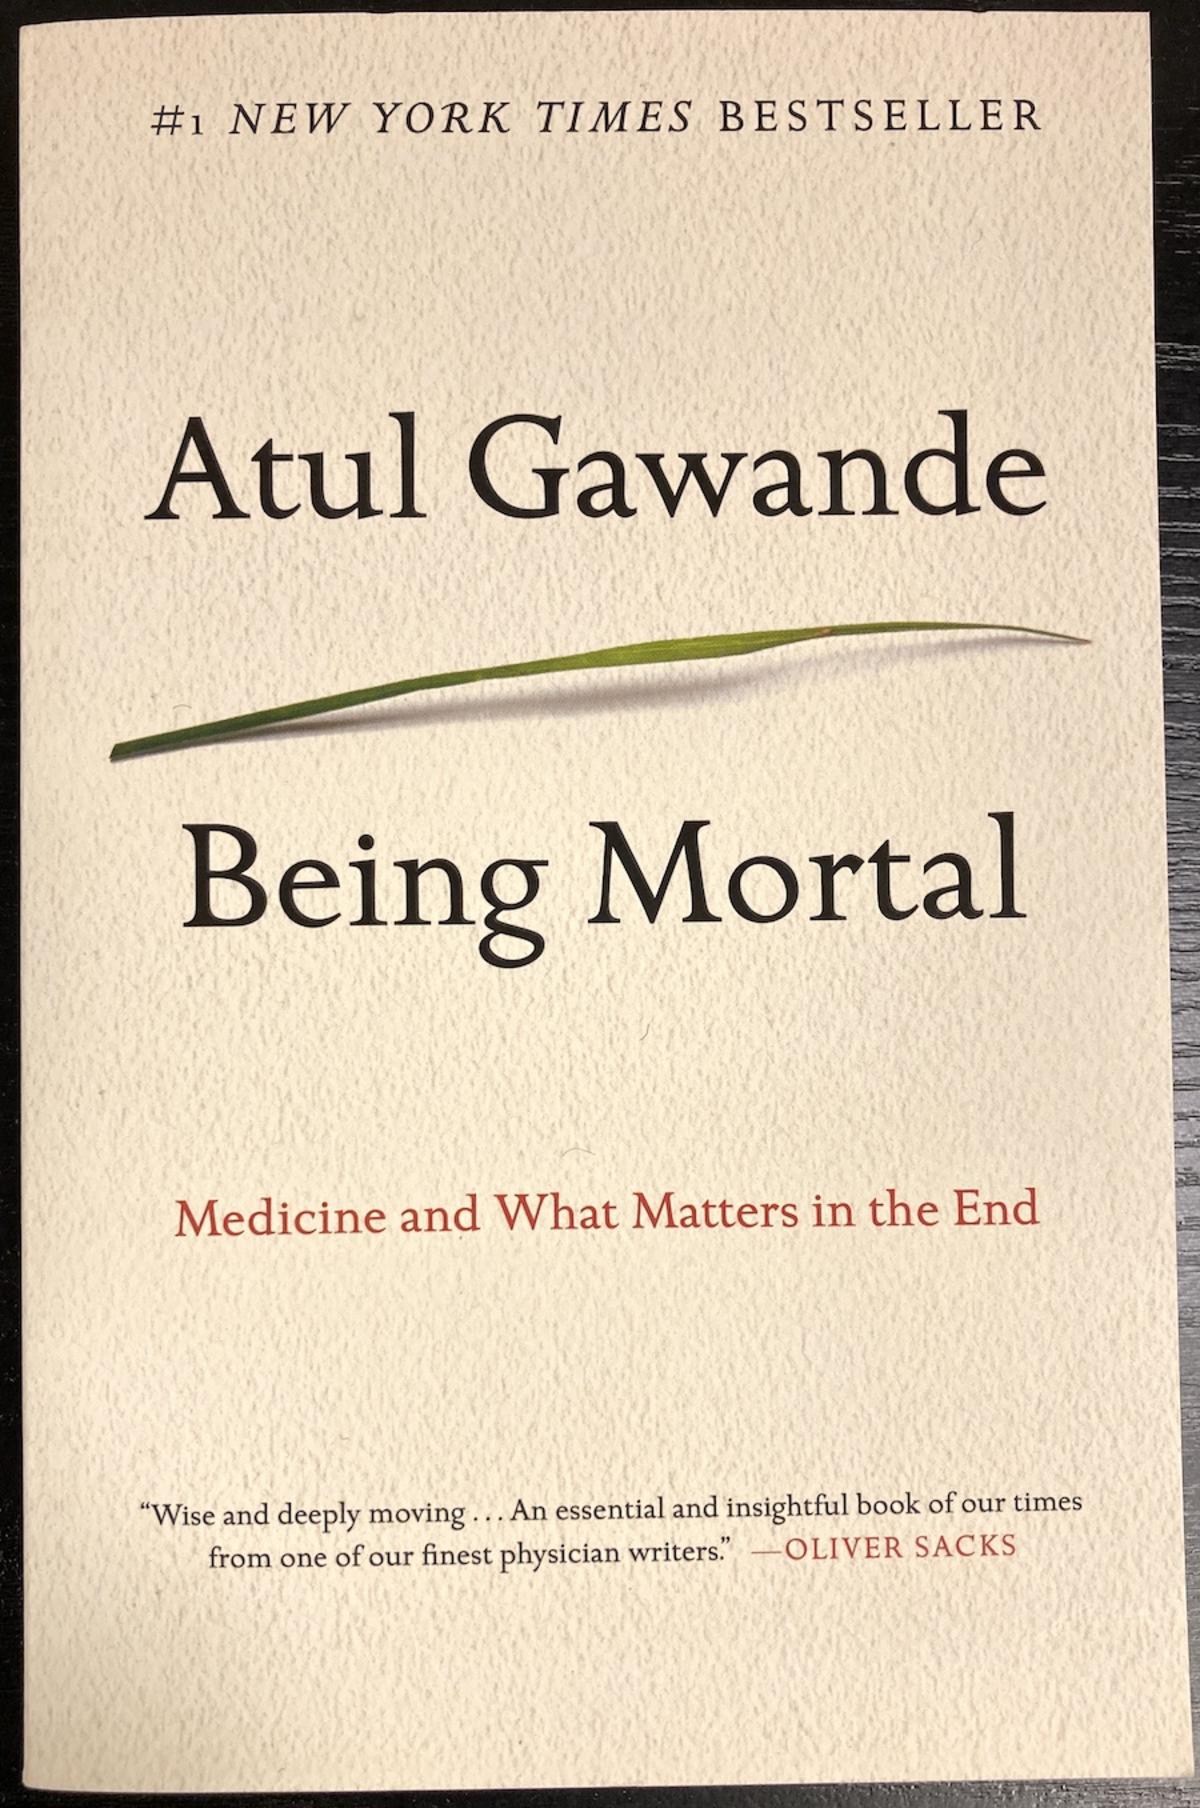 Being Mortal book cover